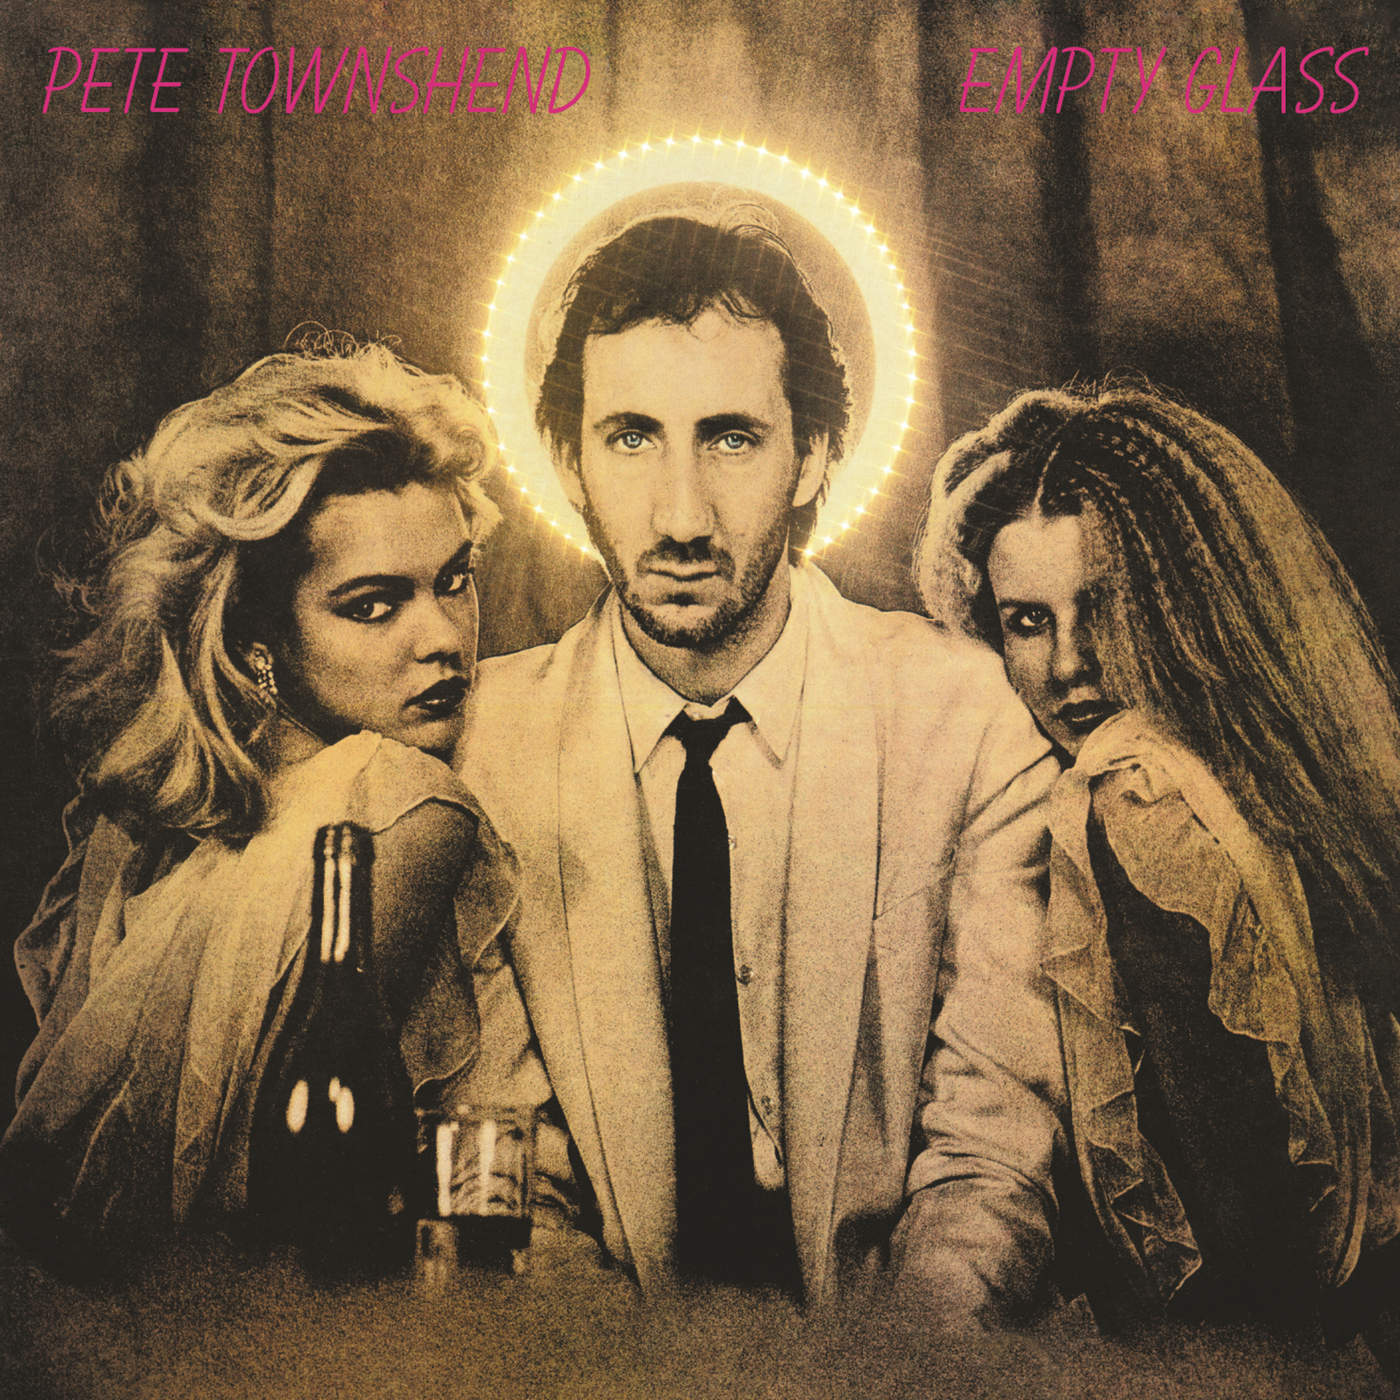 Art for Let My Love Open the Door by Pete Townshend